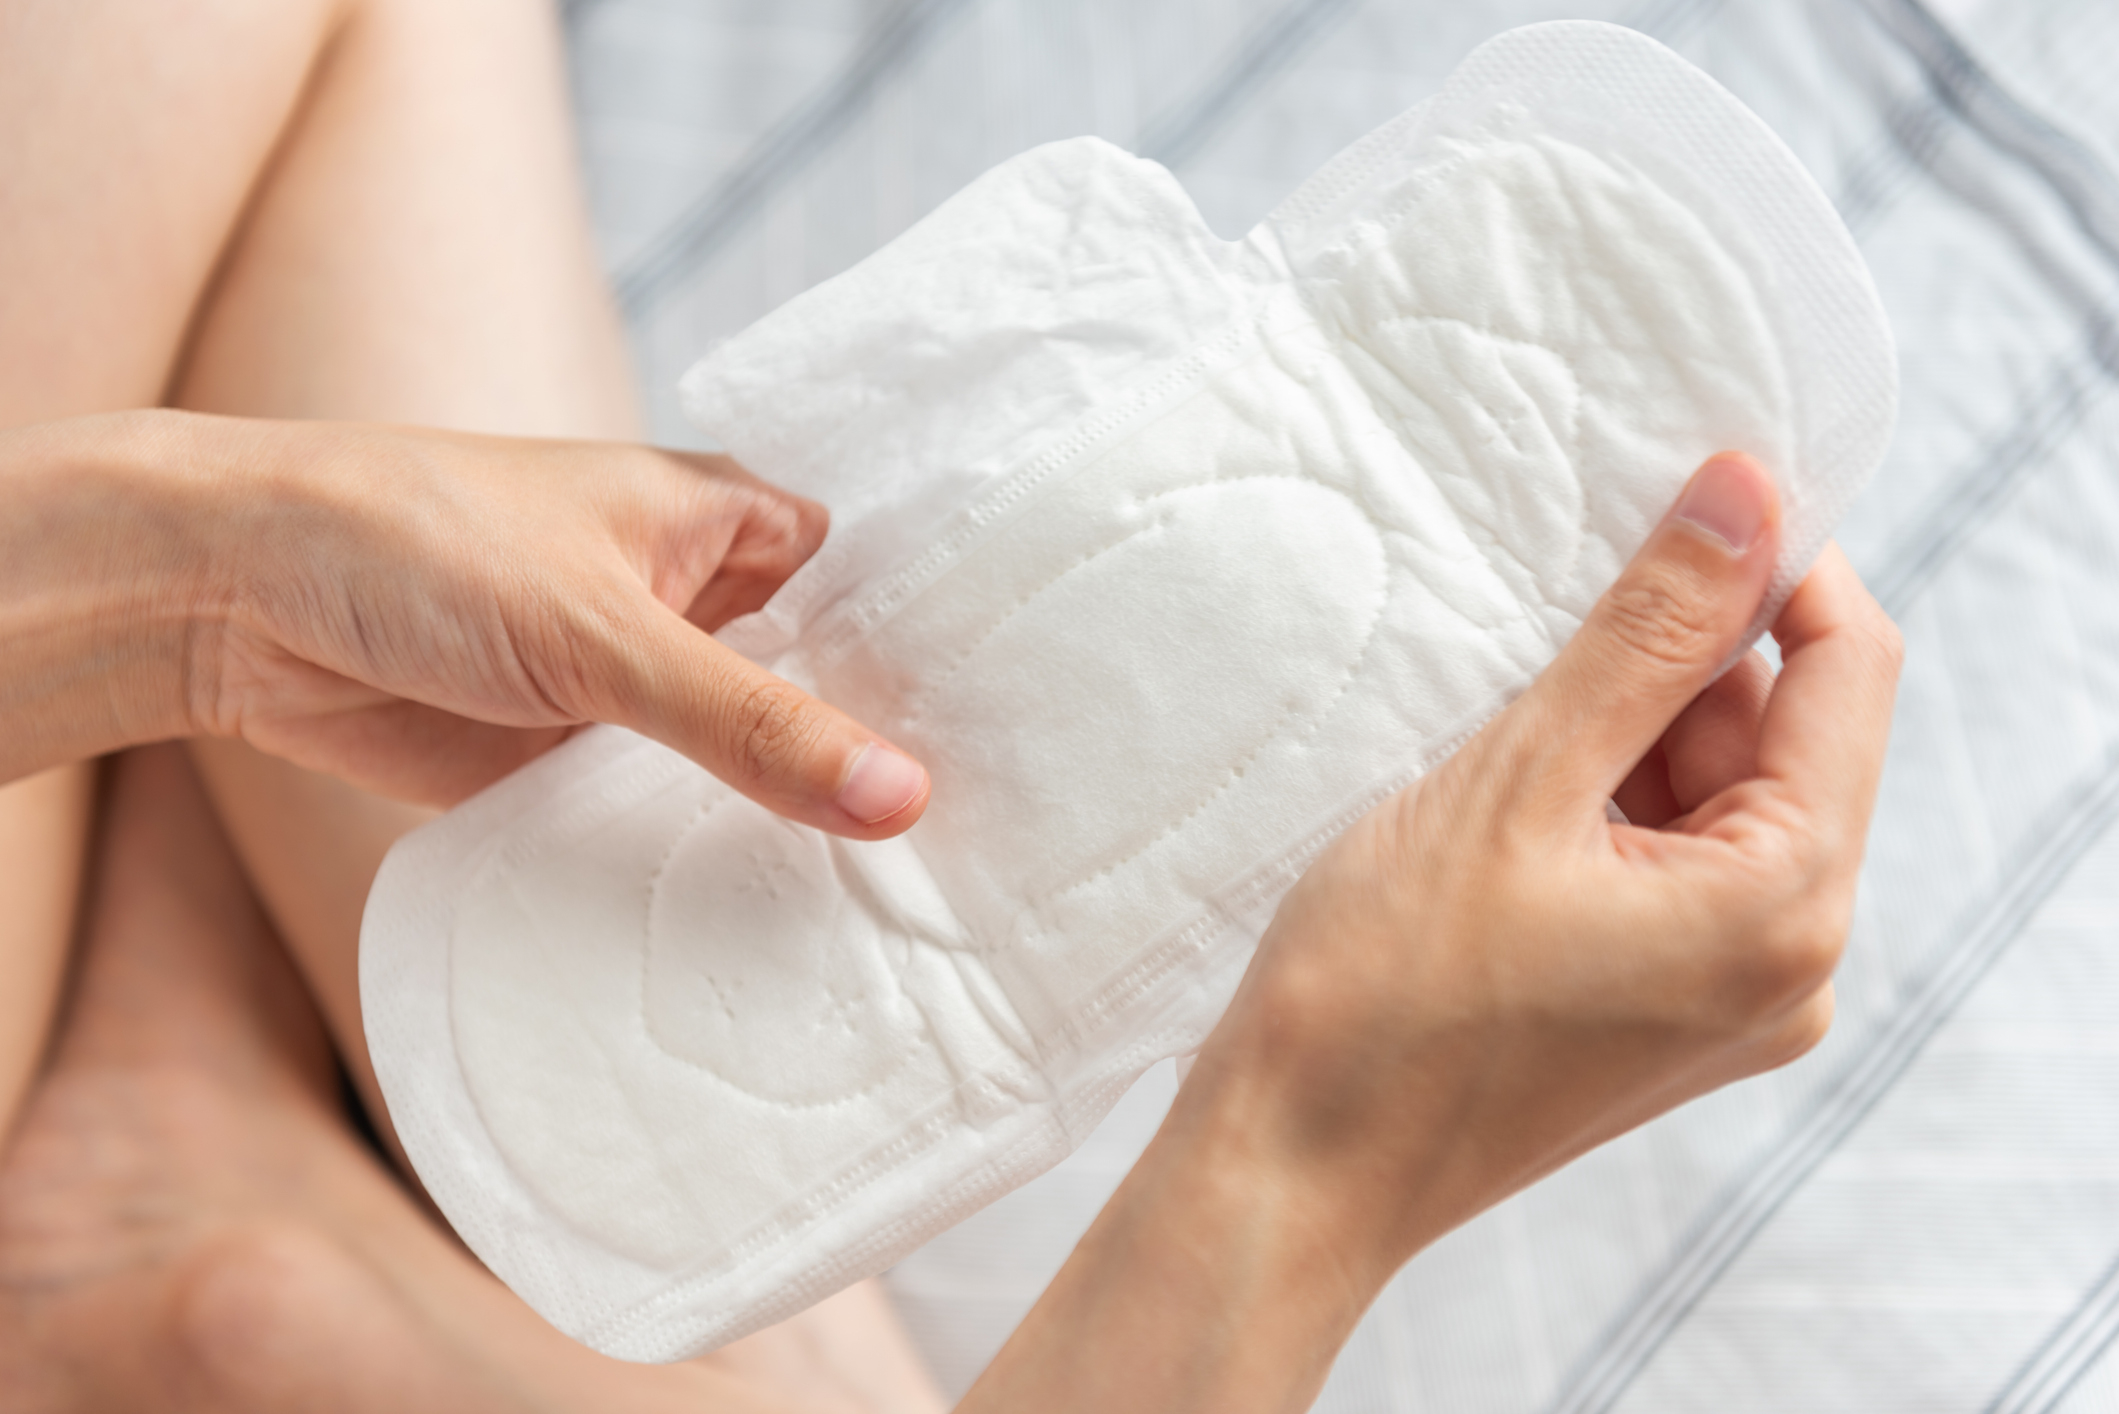 Hands holding a sanitary pad, implying a discussion on menstrual health or products